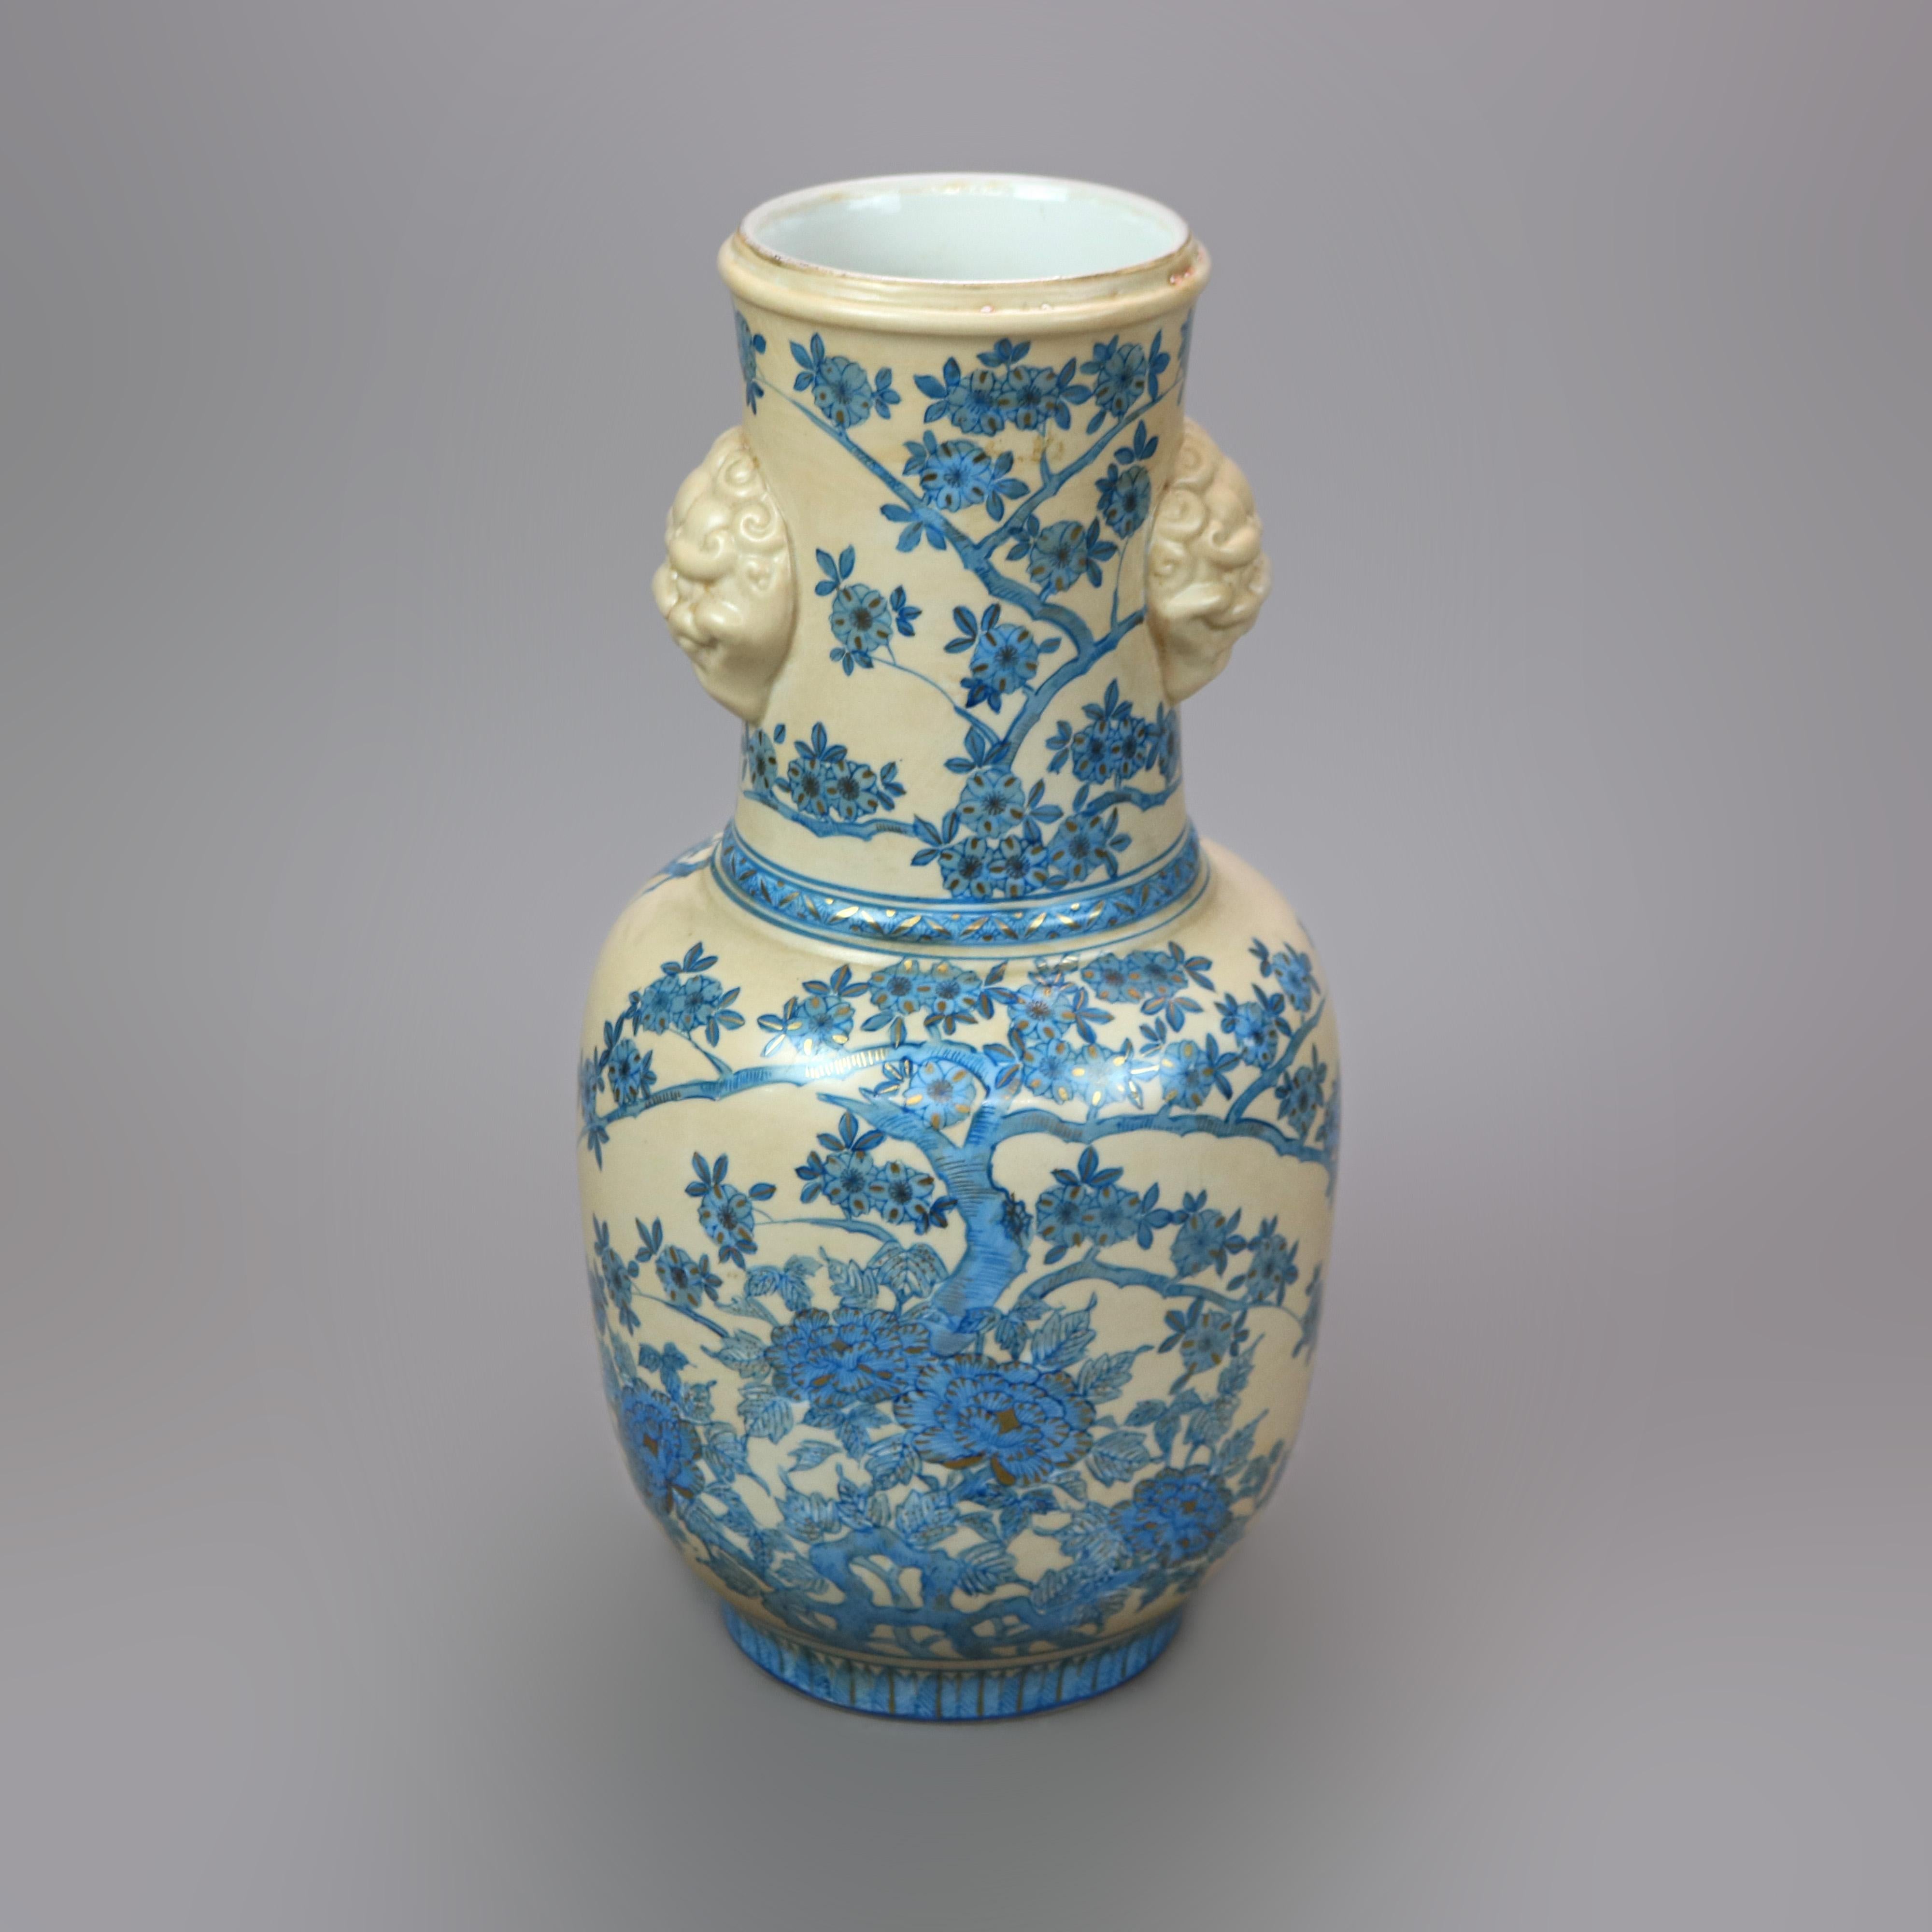 A Chinese figural vase offers porcelain construction in bulbous form having foo dog mask double handles over hand painted vessel with garden design, gilt highlights throughout, 20th century

Measures - 17.5'' H x 8.5'' W x 8.5'' D.

Catalogue Note: